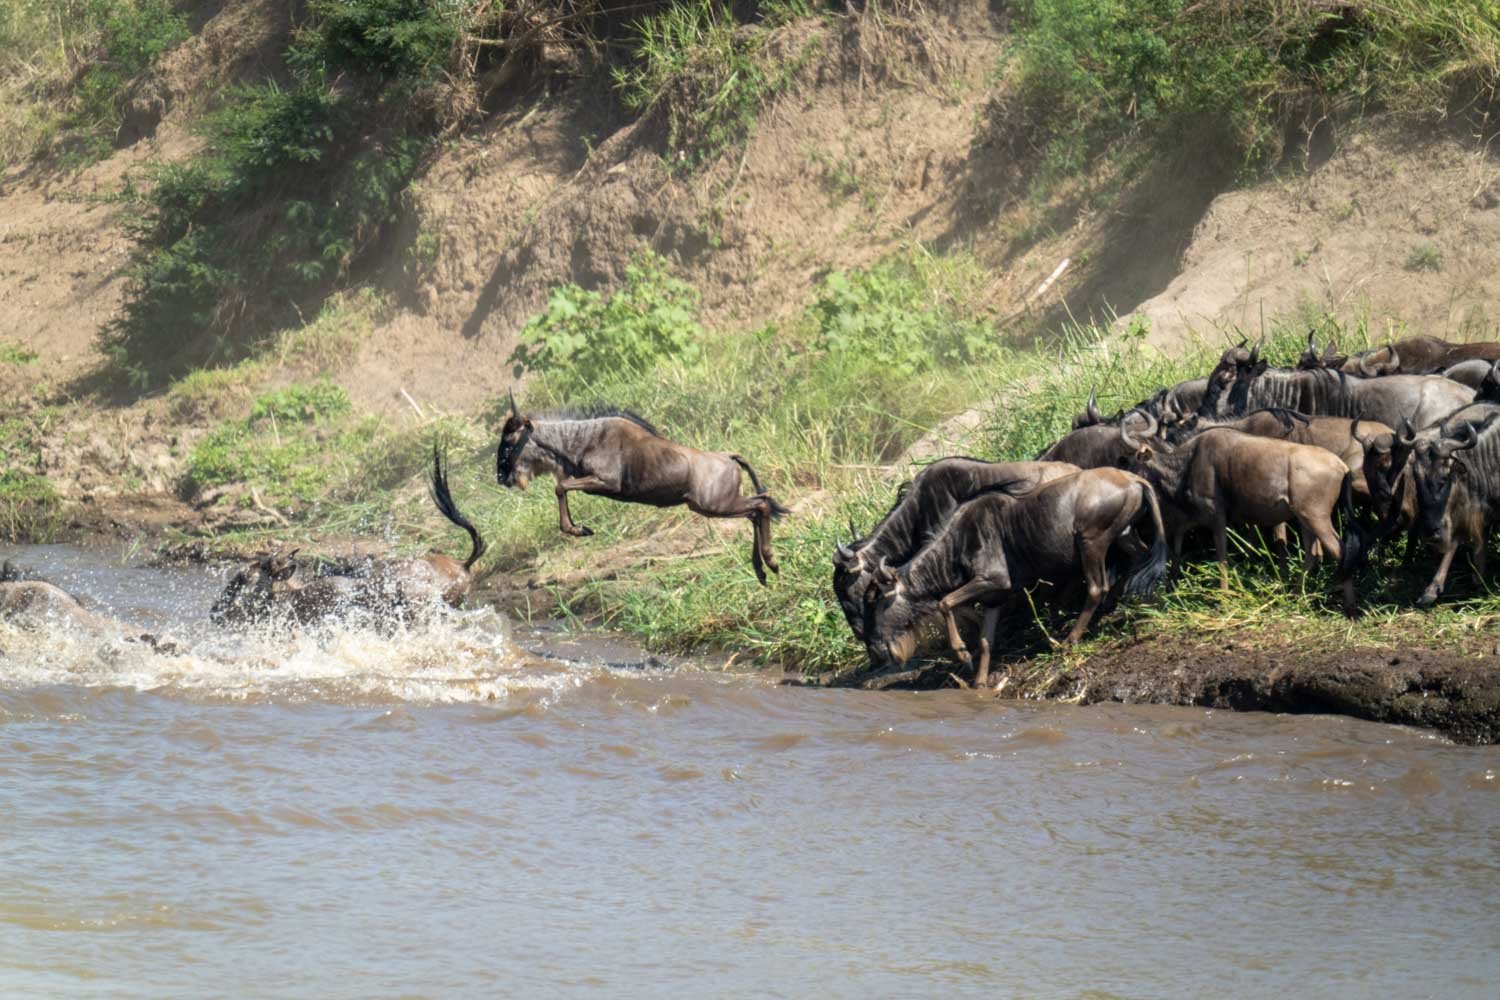 Blue wildebeest jumps into river from shore